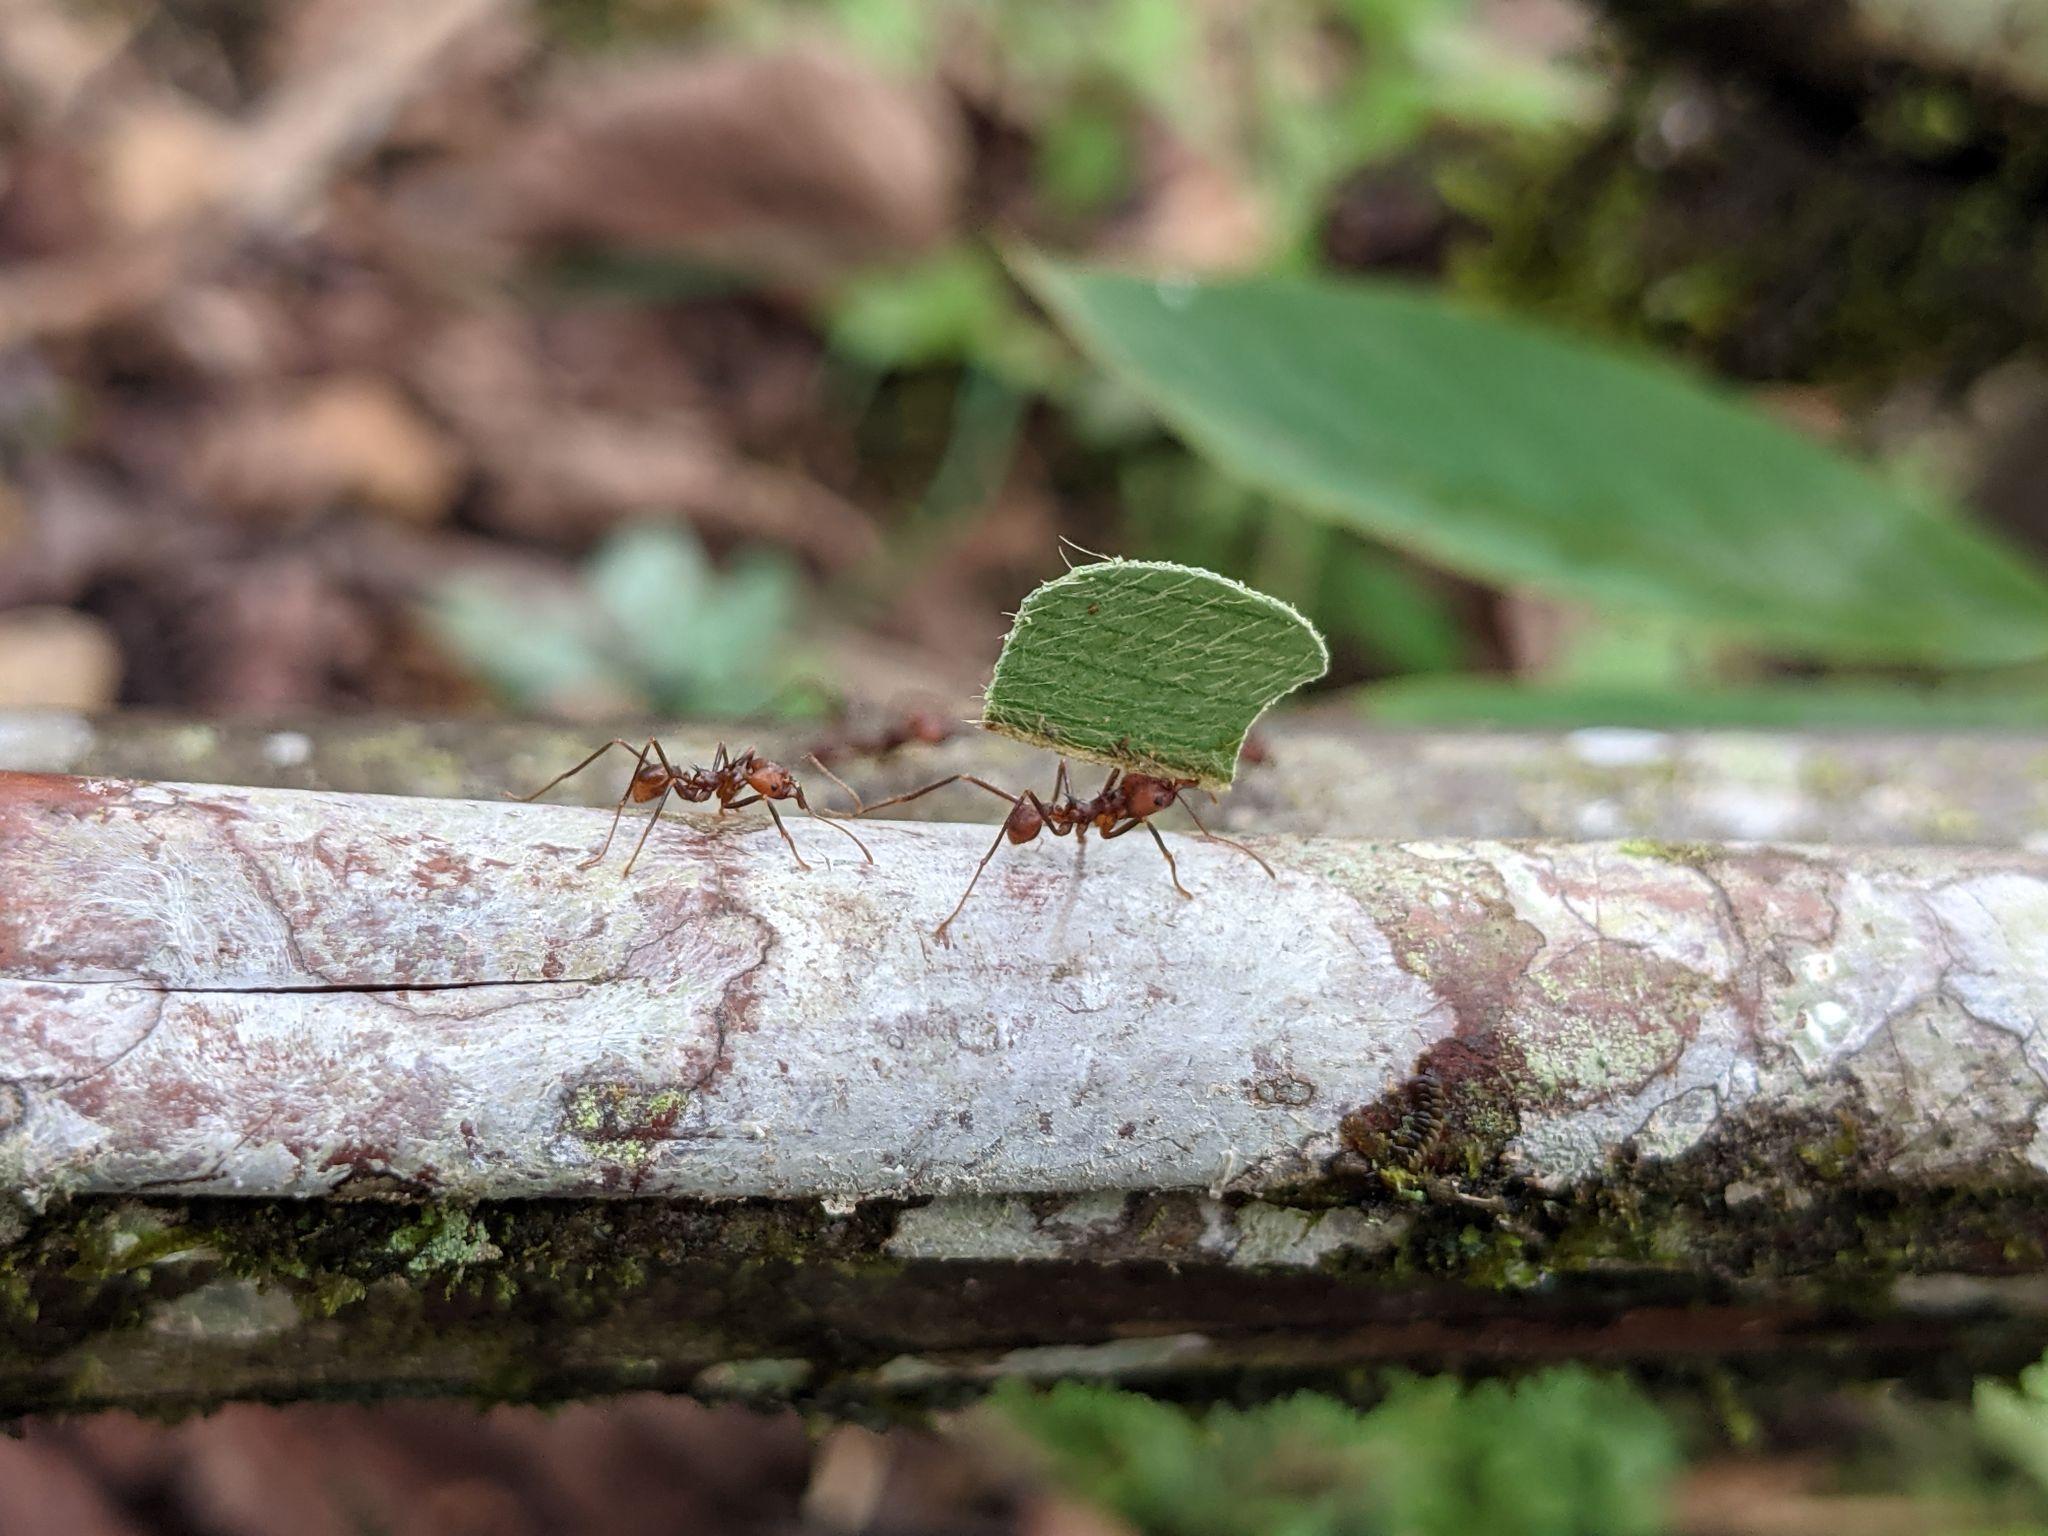 Two ants, one of the holding part of a leaf, walk across a branch